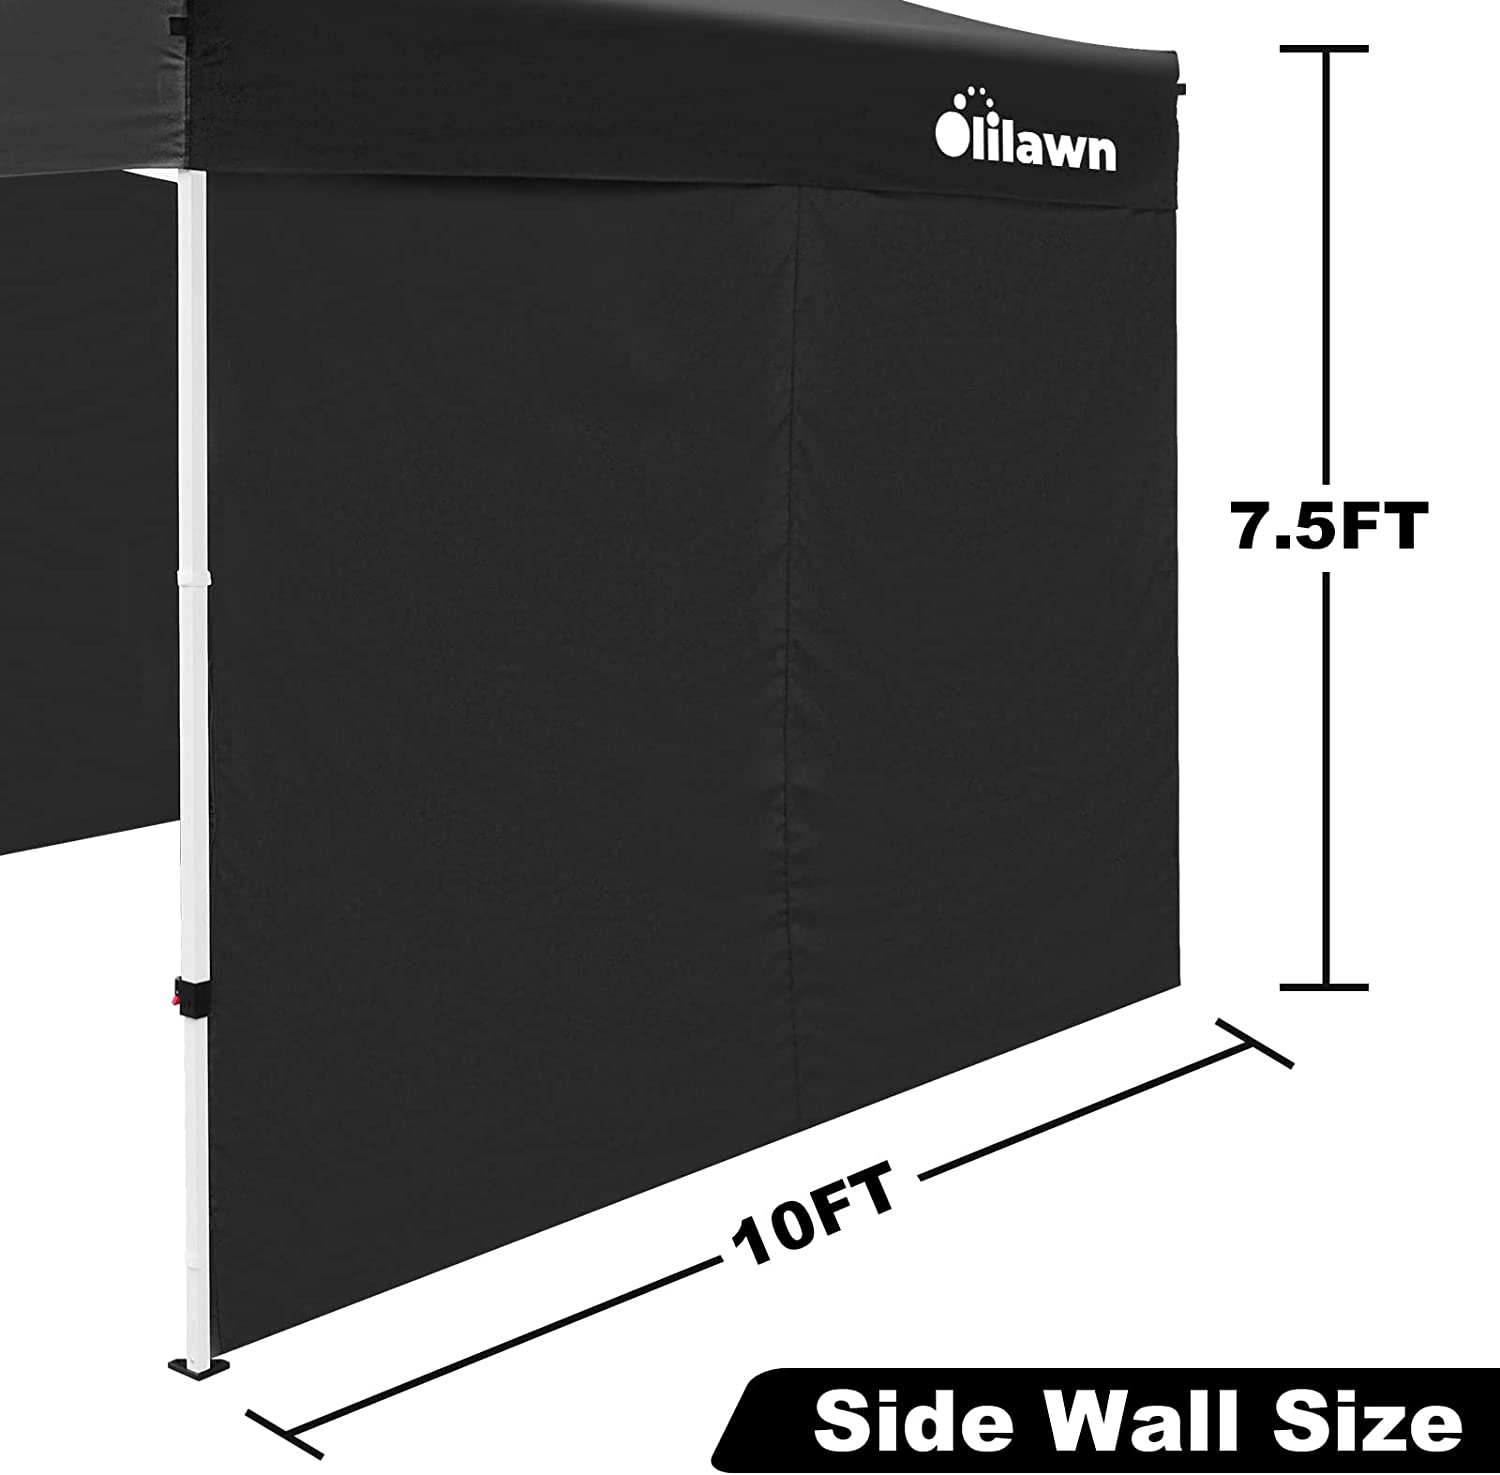 OLILAWN 10x10 Pop Up Canopy Tent Outdoor Shade Canopy